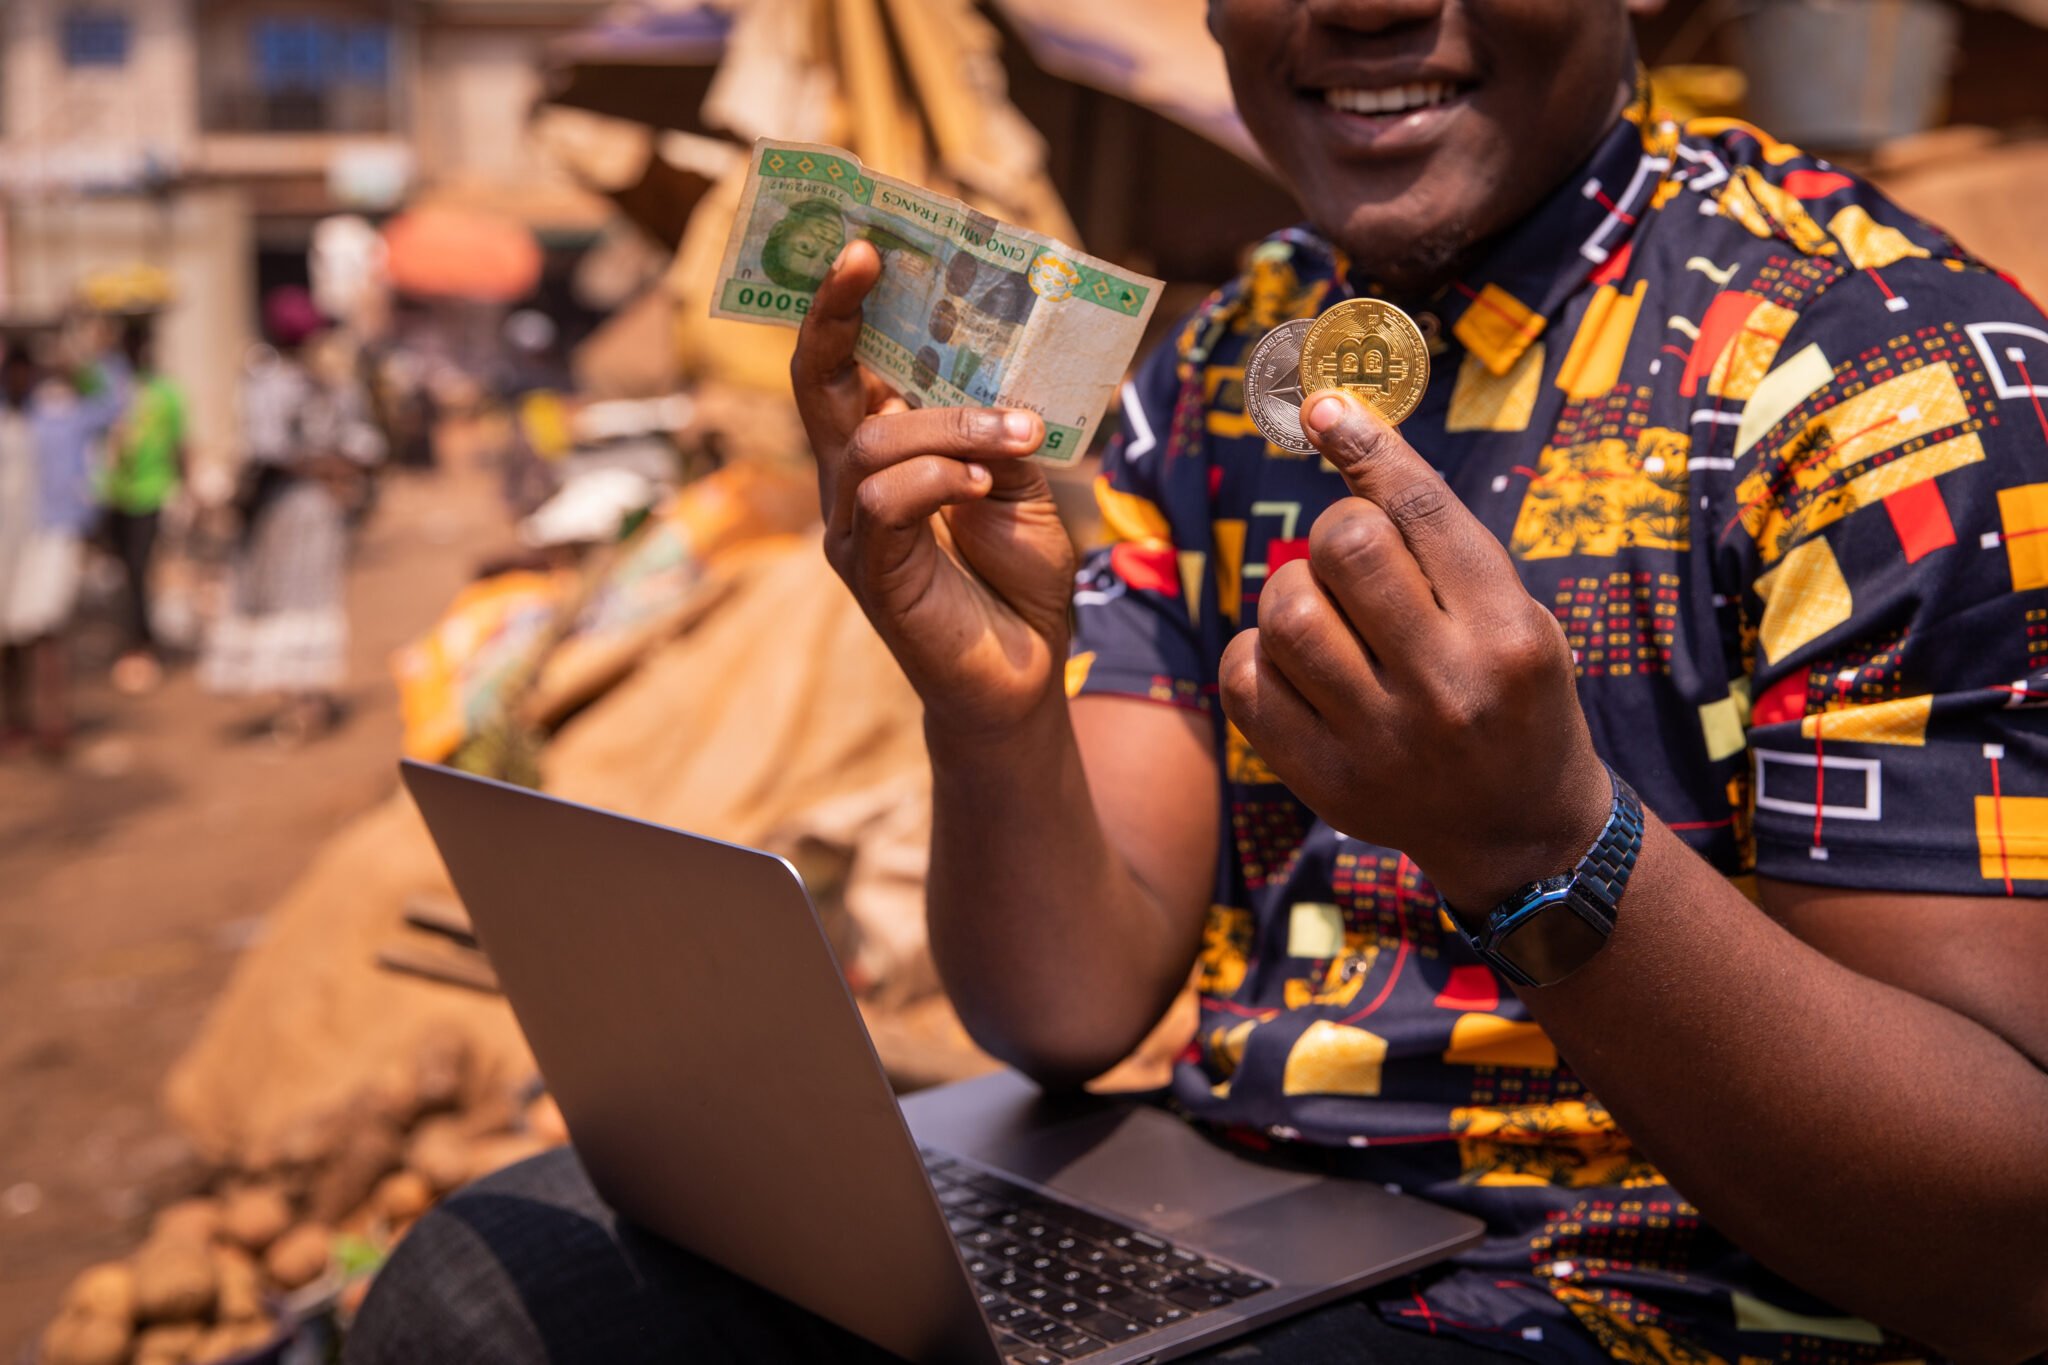 Close-up of the hands of an African boy holding a Bitcoin and Ethereum coin and a 5000 CFA franc note. Digital payments tin Africa concept